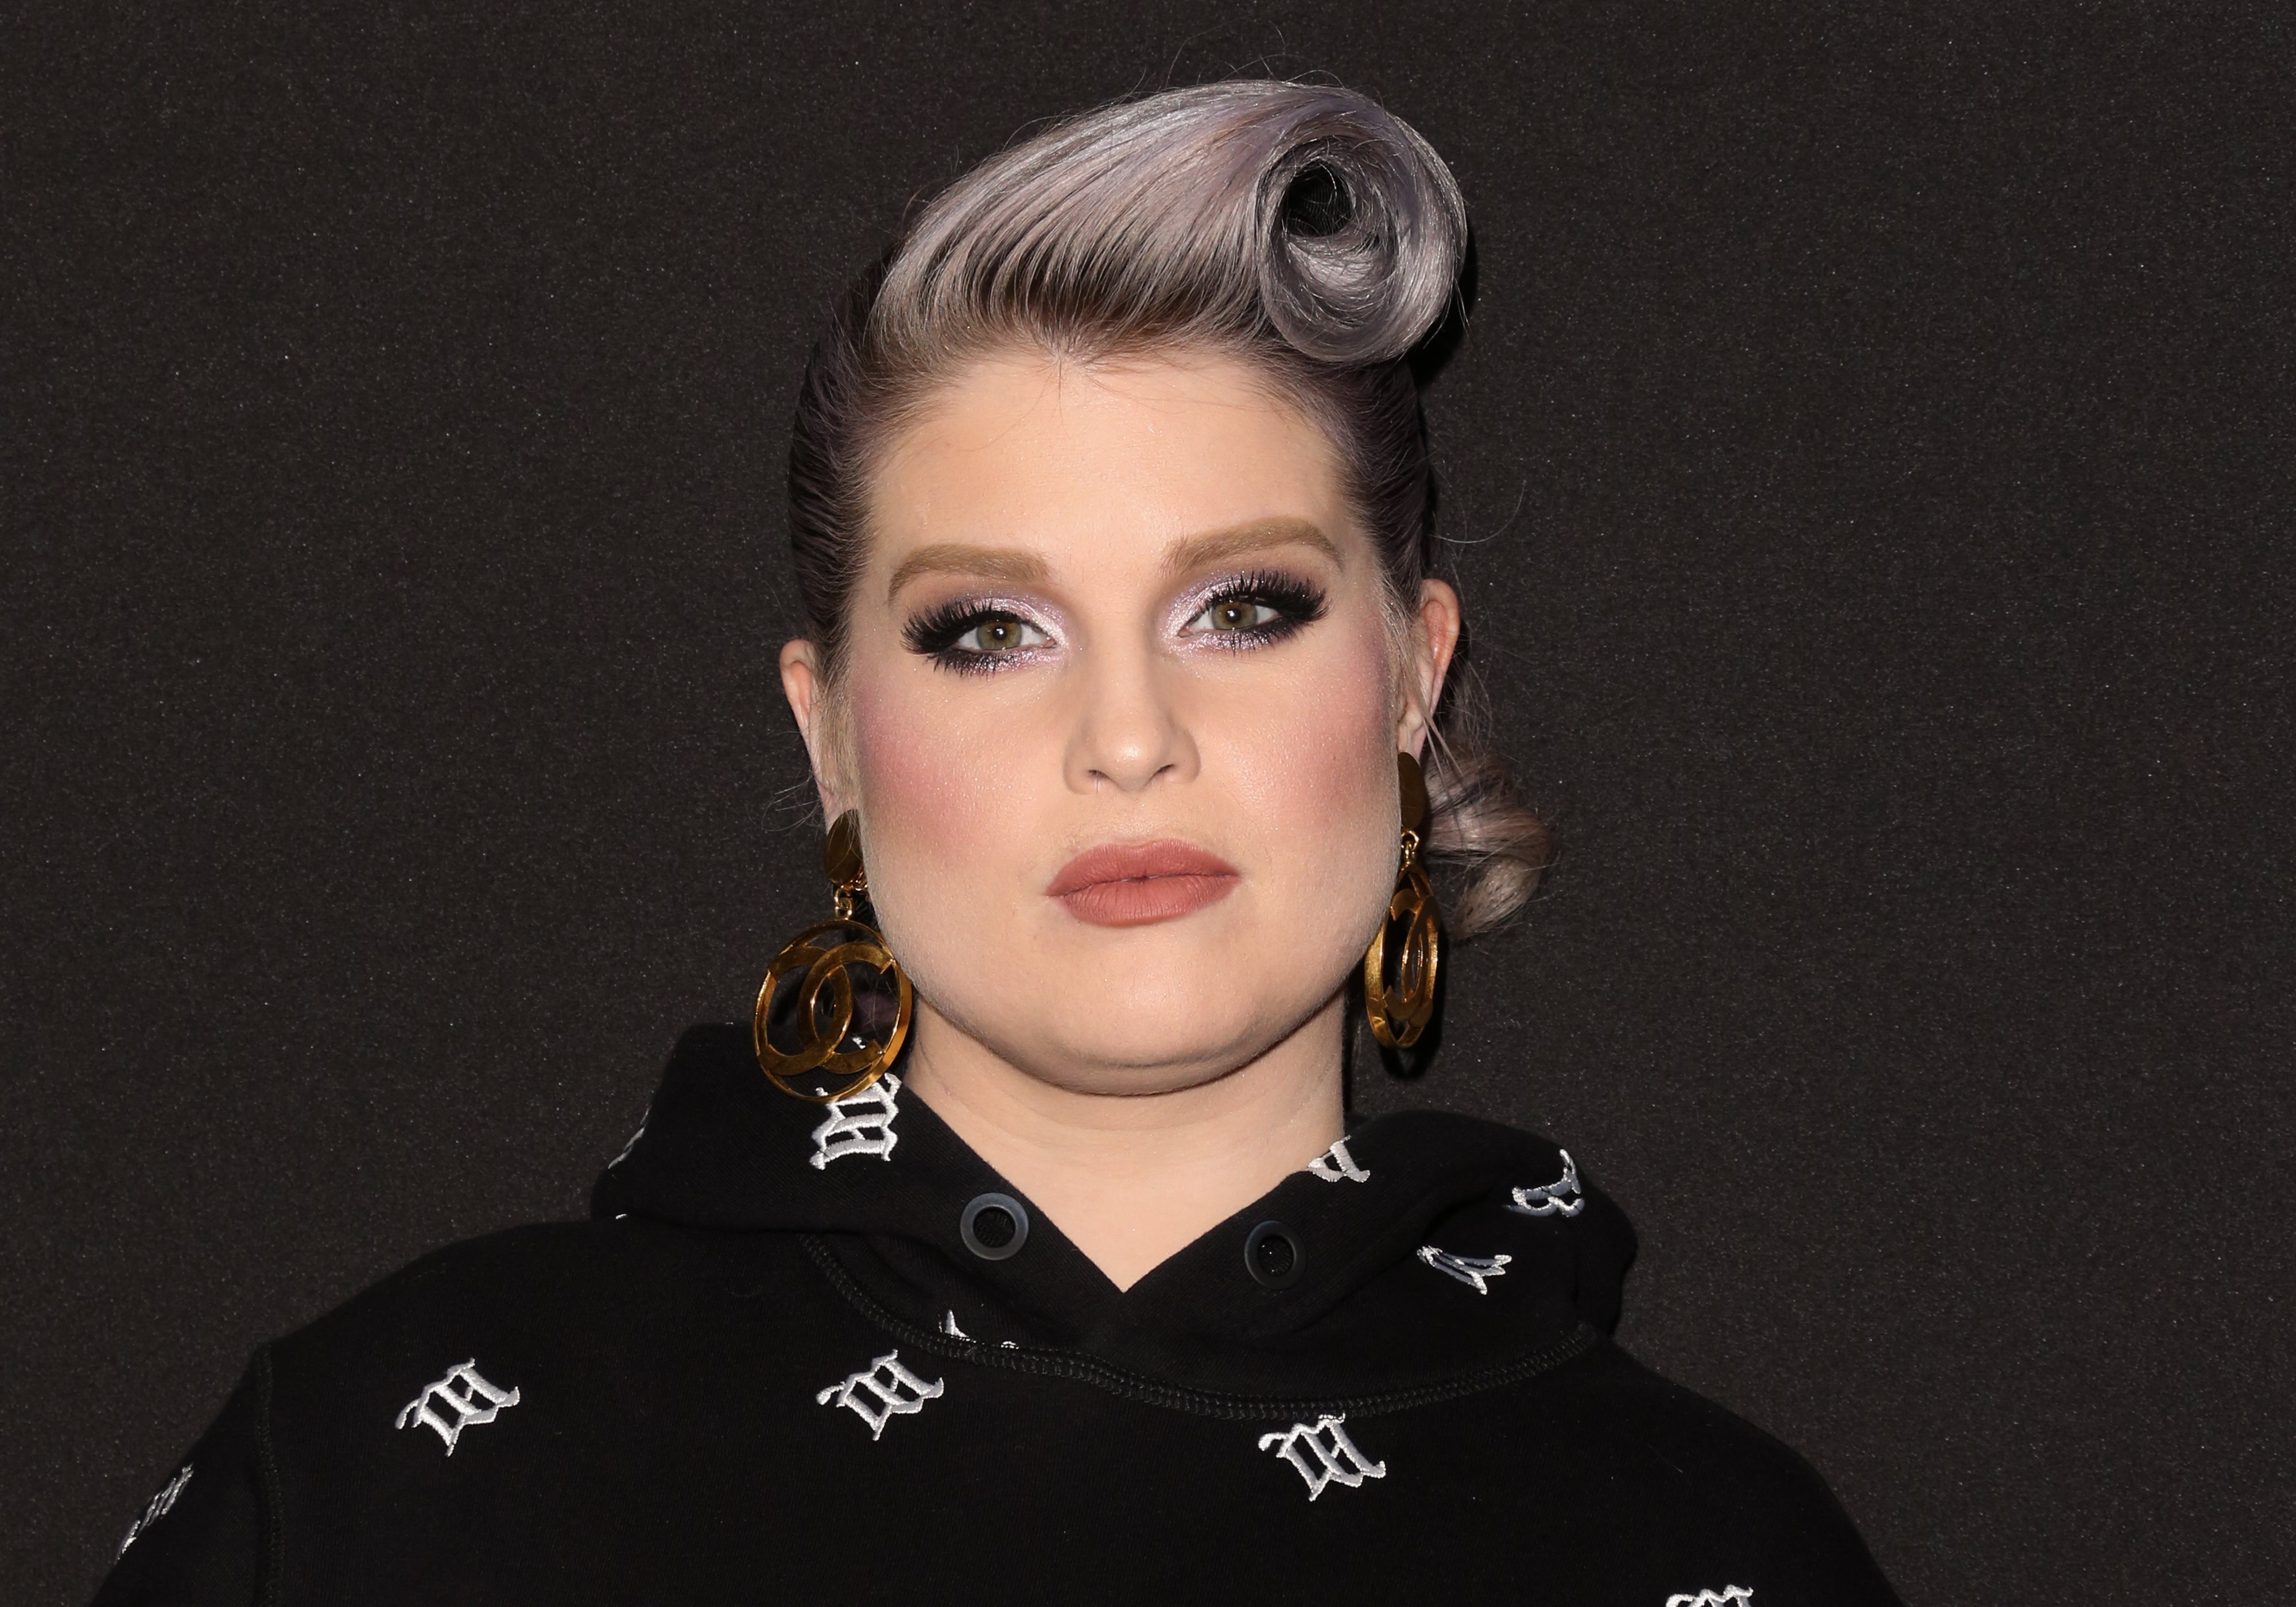 Kelly Osbourne at the "Wheels" California's bike-share app on March 14, 2019 | Source: Getty Images